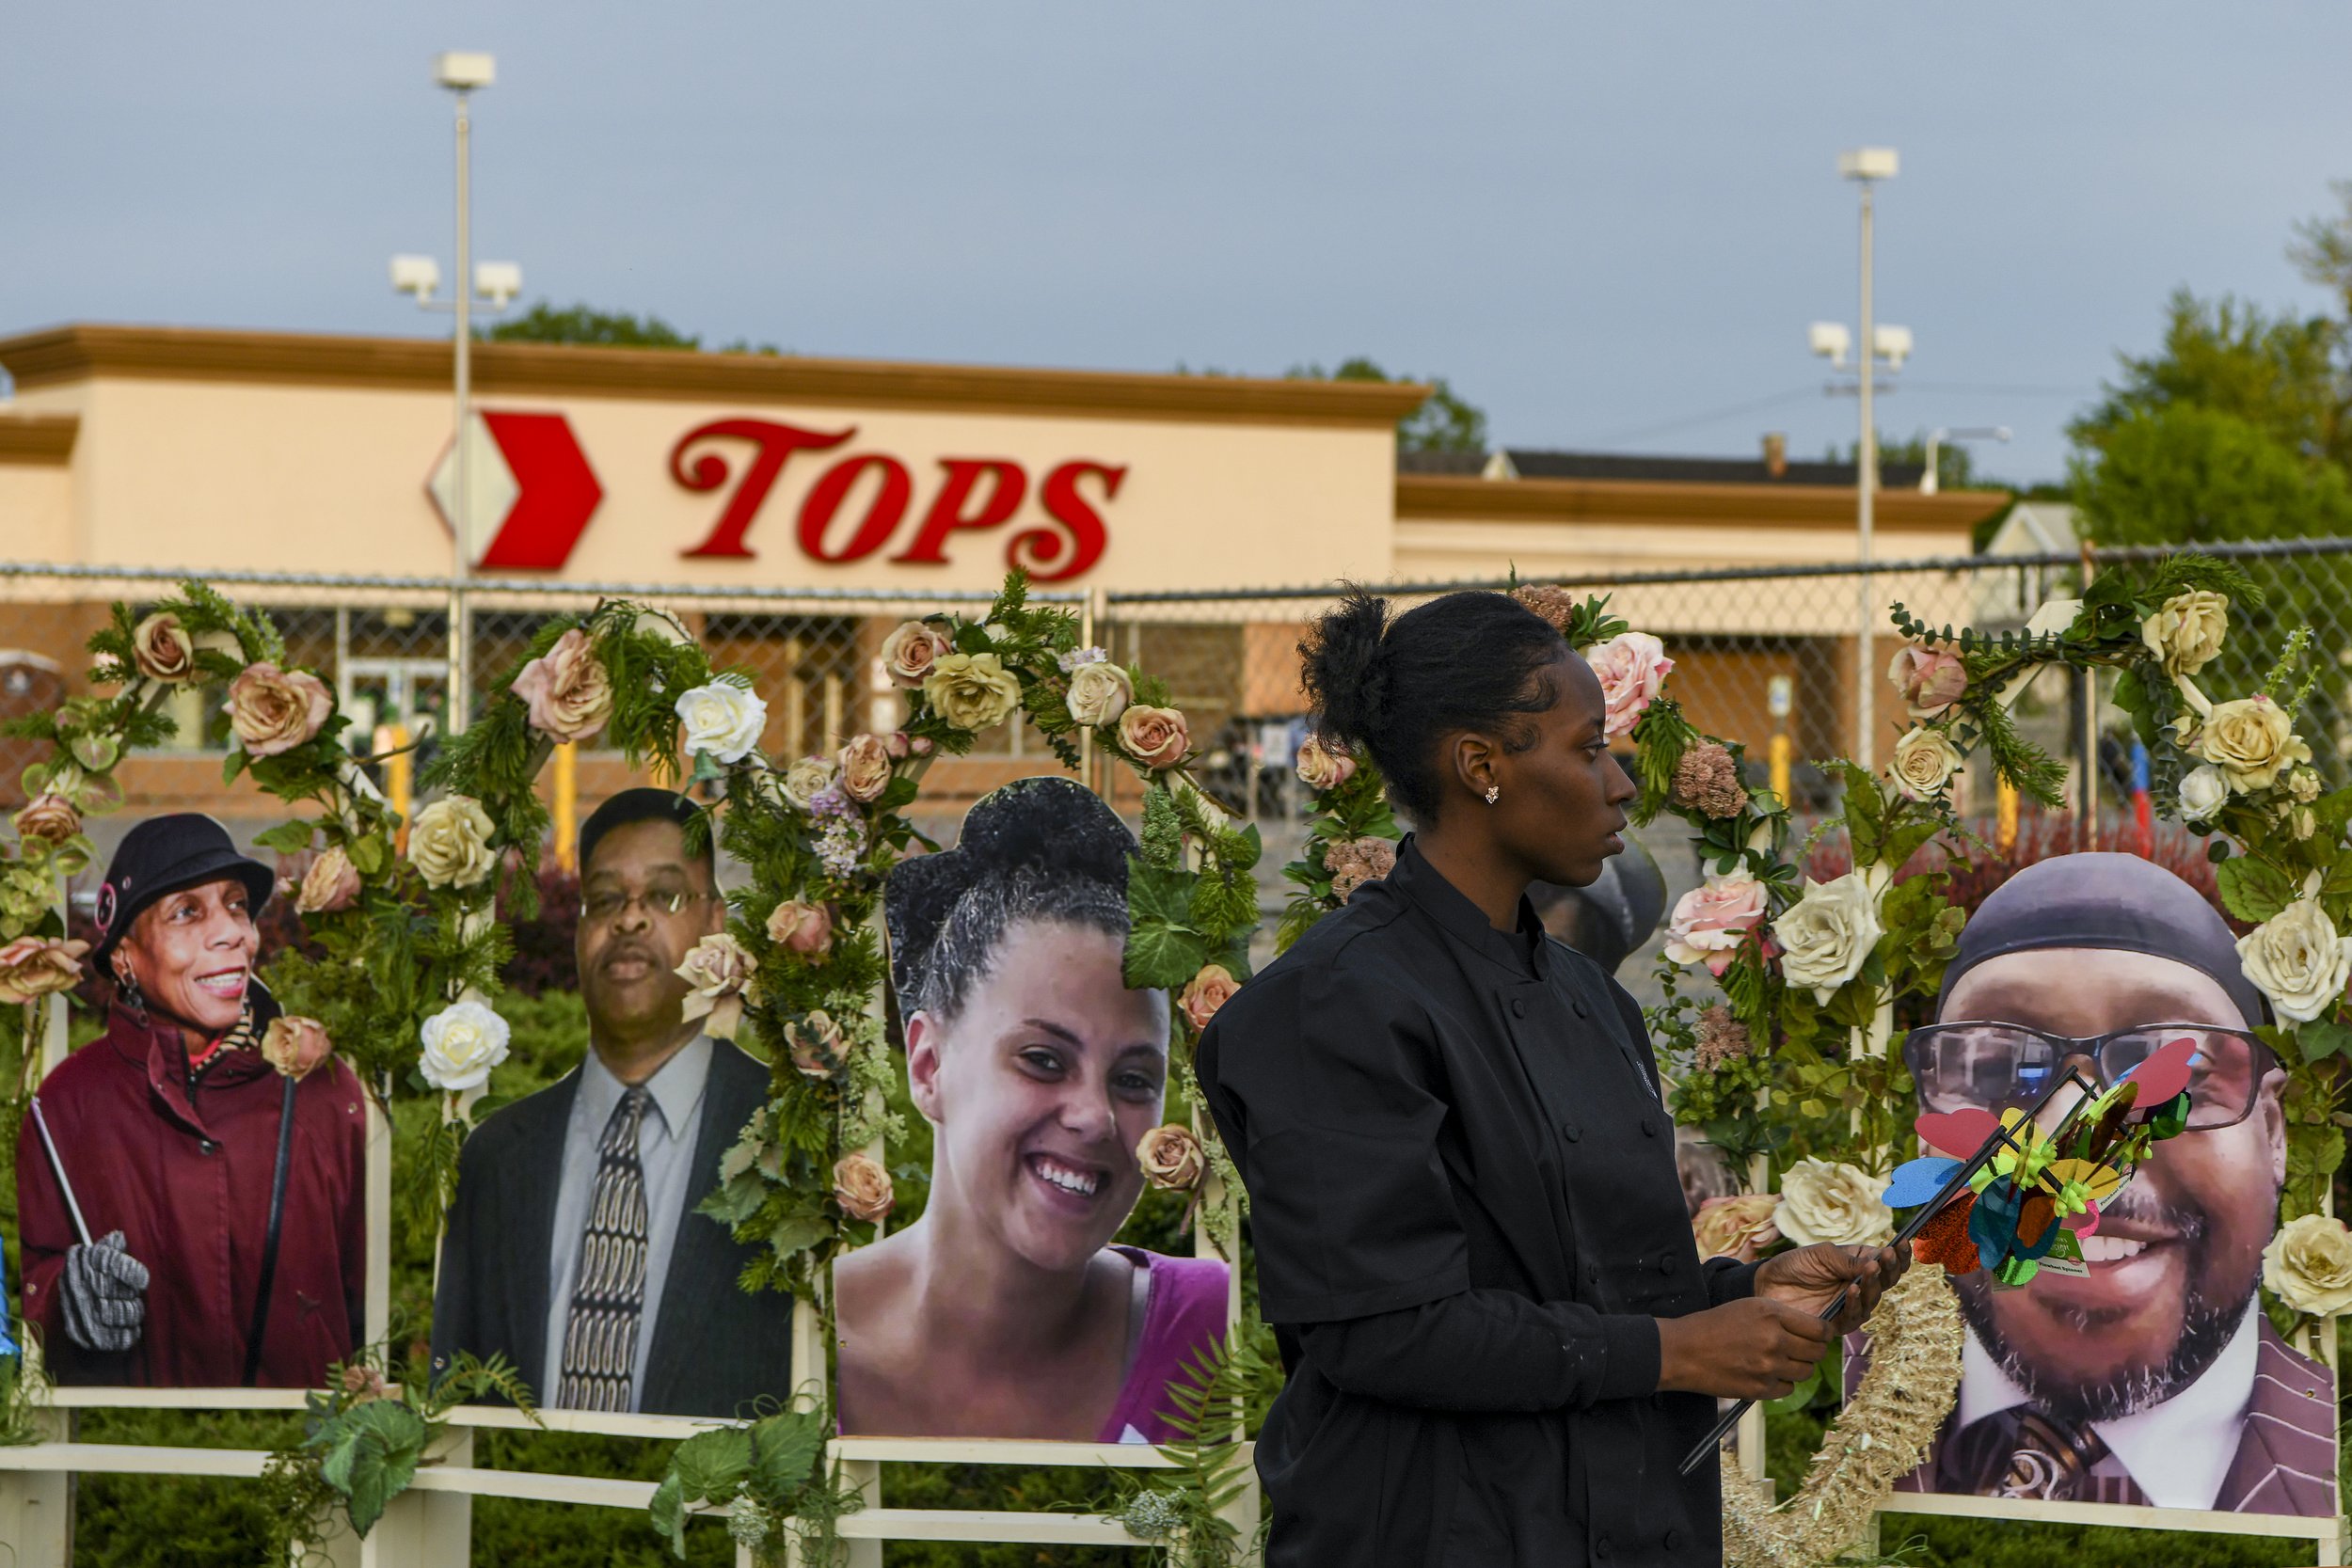  Large images depicting those who were killed during the mass shooting have been added to the memorial site outside the Tops Friendly Market. 